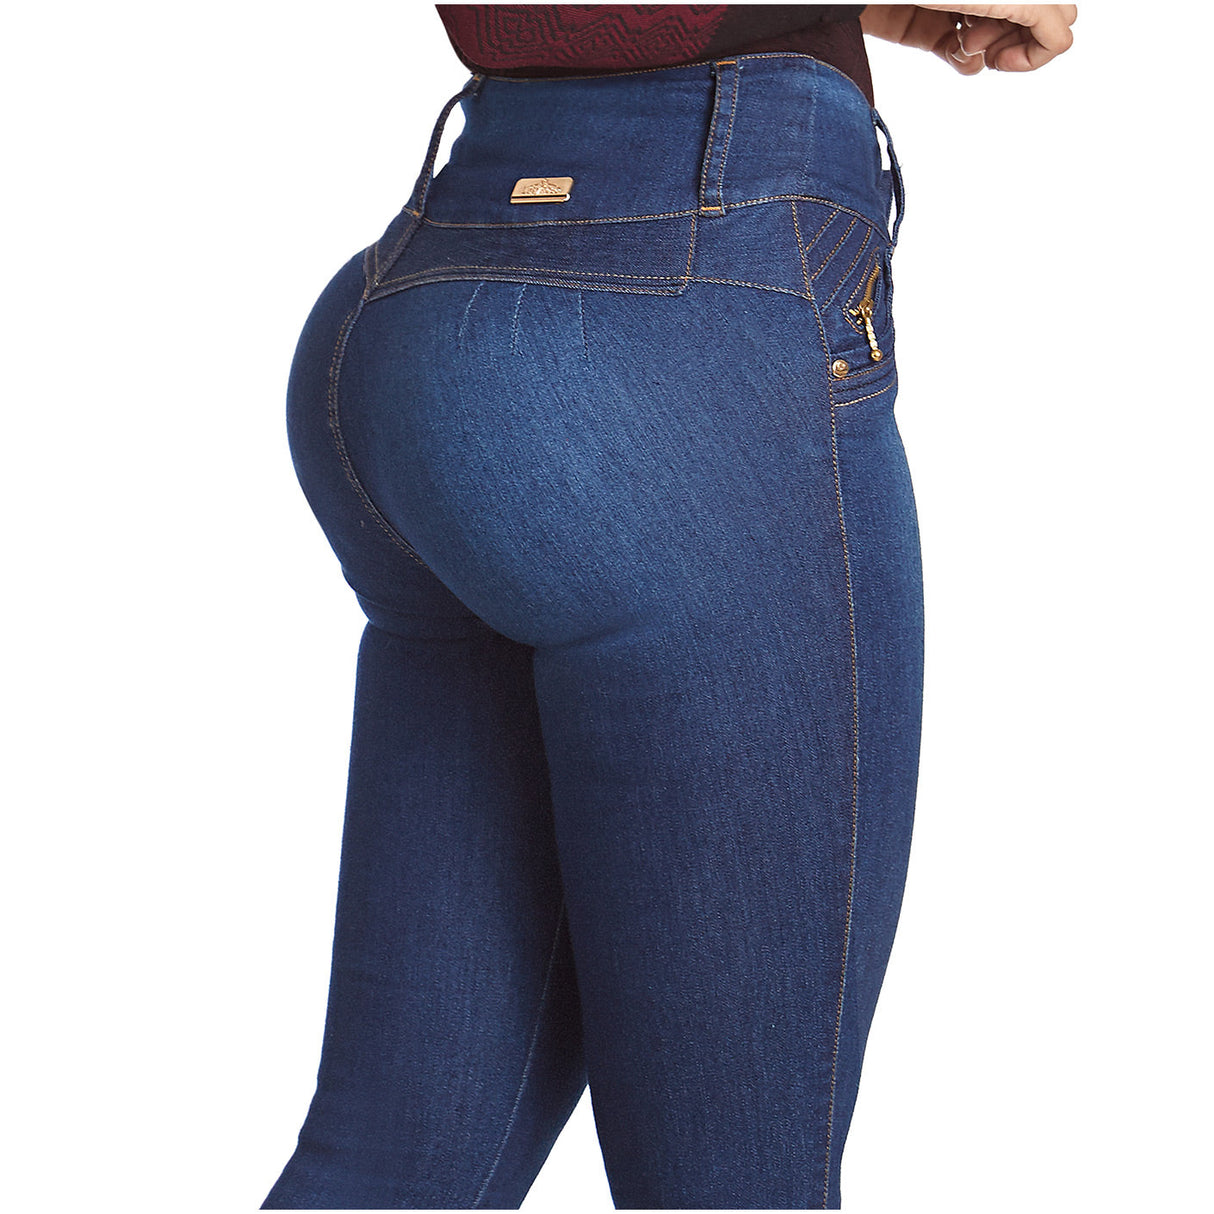 Exclusive Colombian Butt Lift Jeans Sizes: 3/4,5/6 ,7/8,9/10